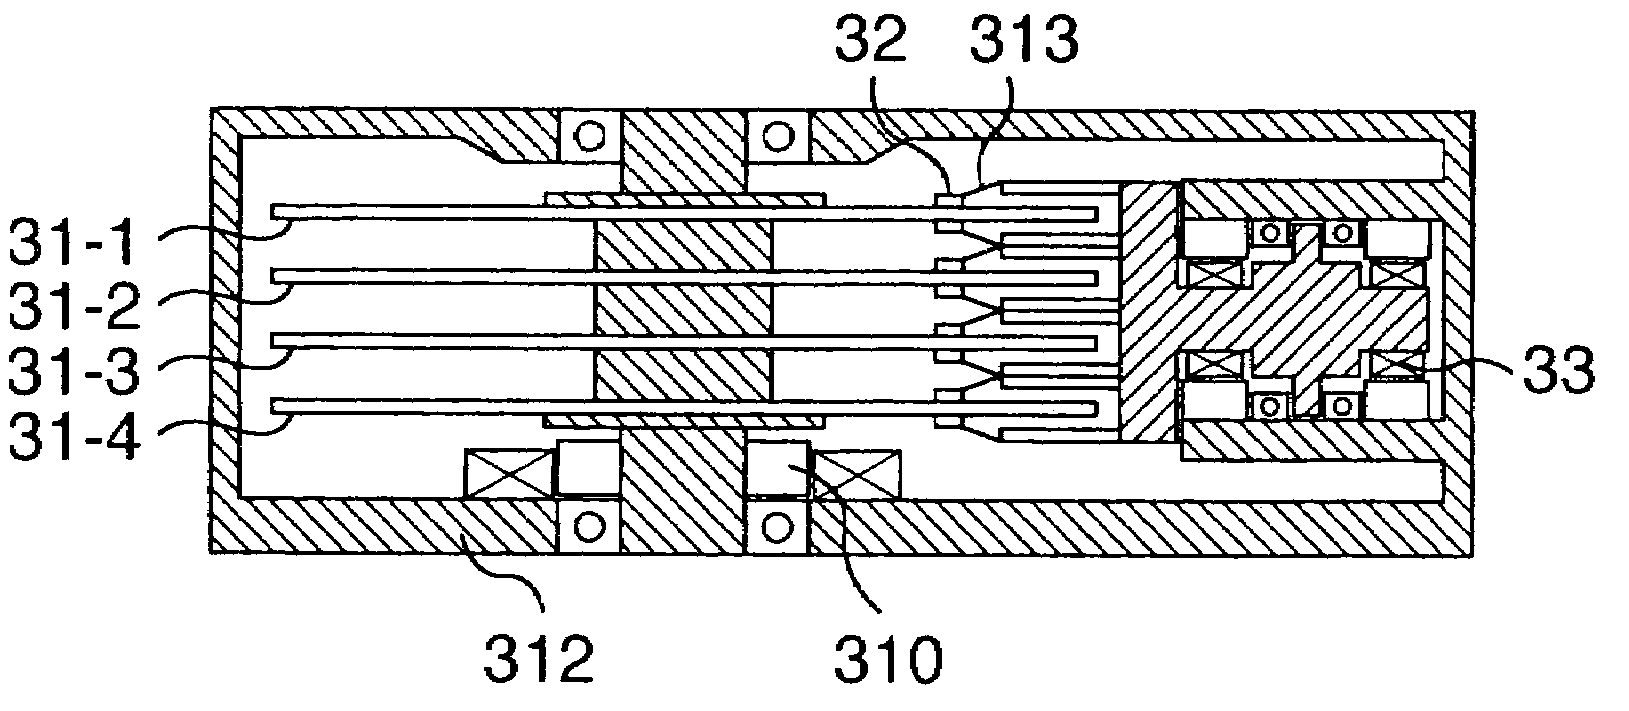 Magnetic recording and reading device